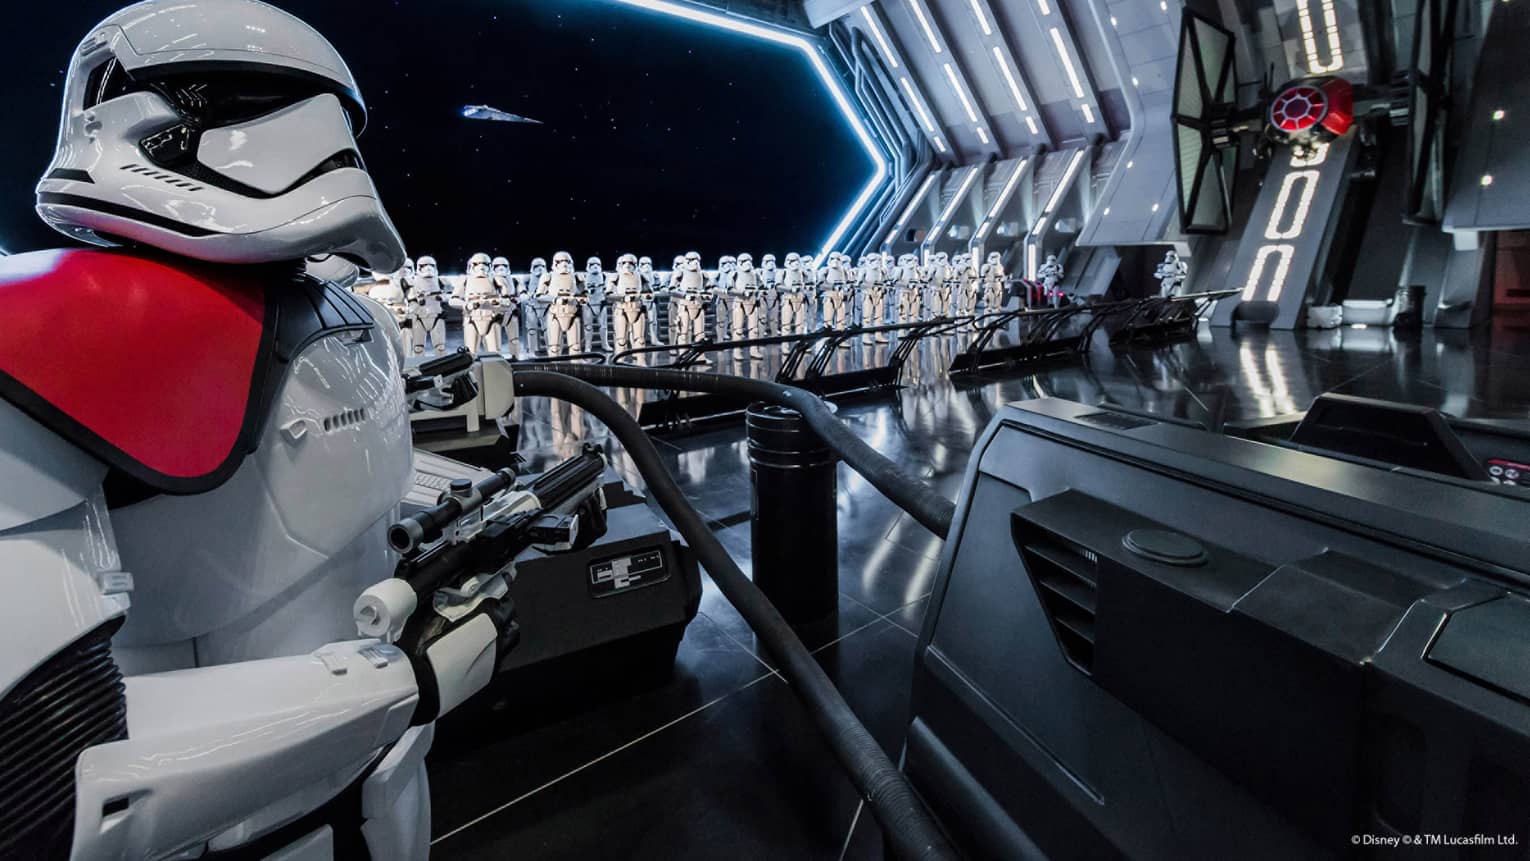 A stormtrooper in white armor is standing on the inside of a spaceship.